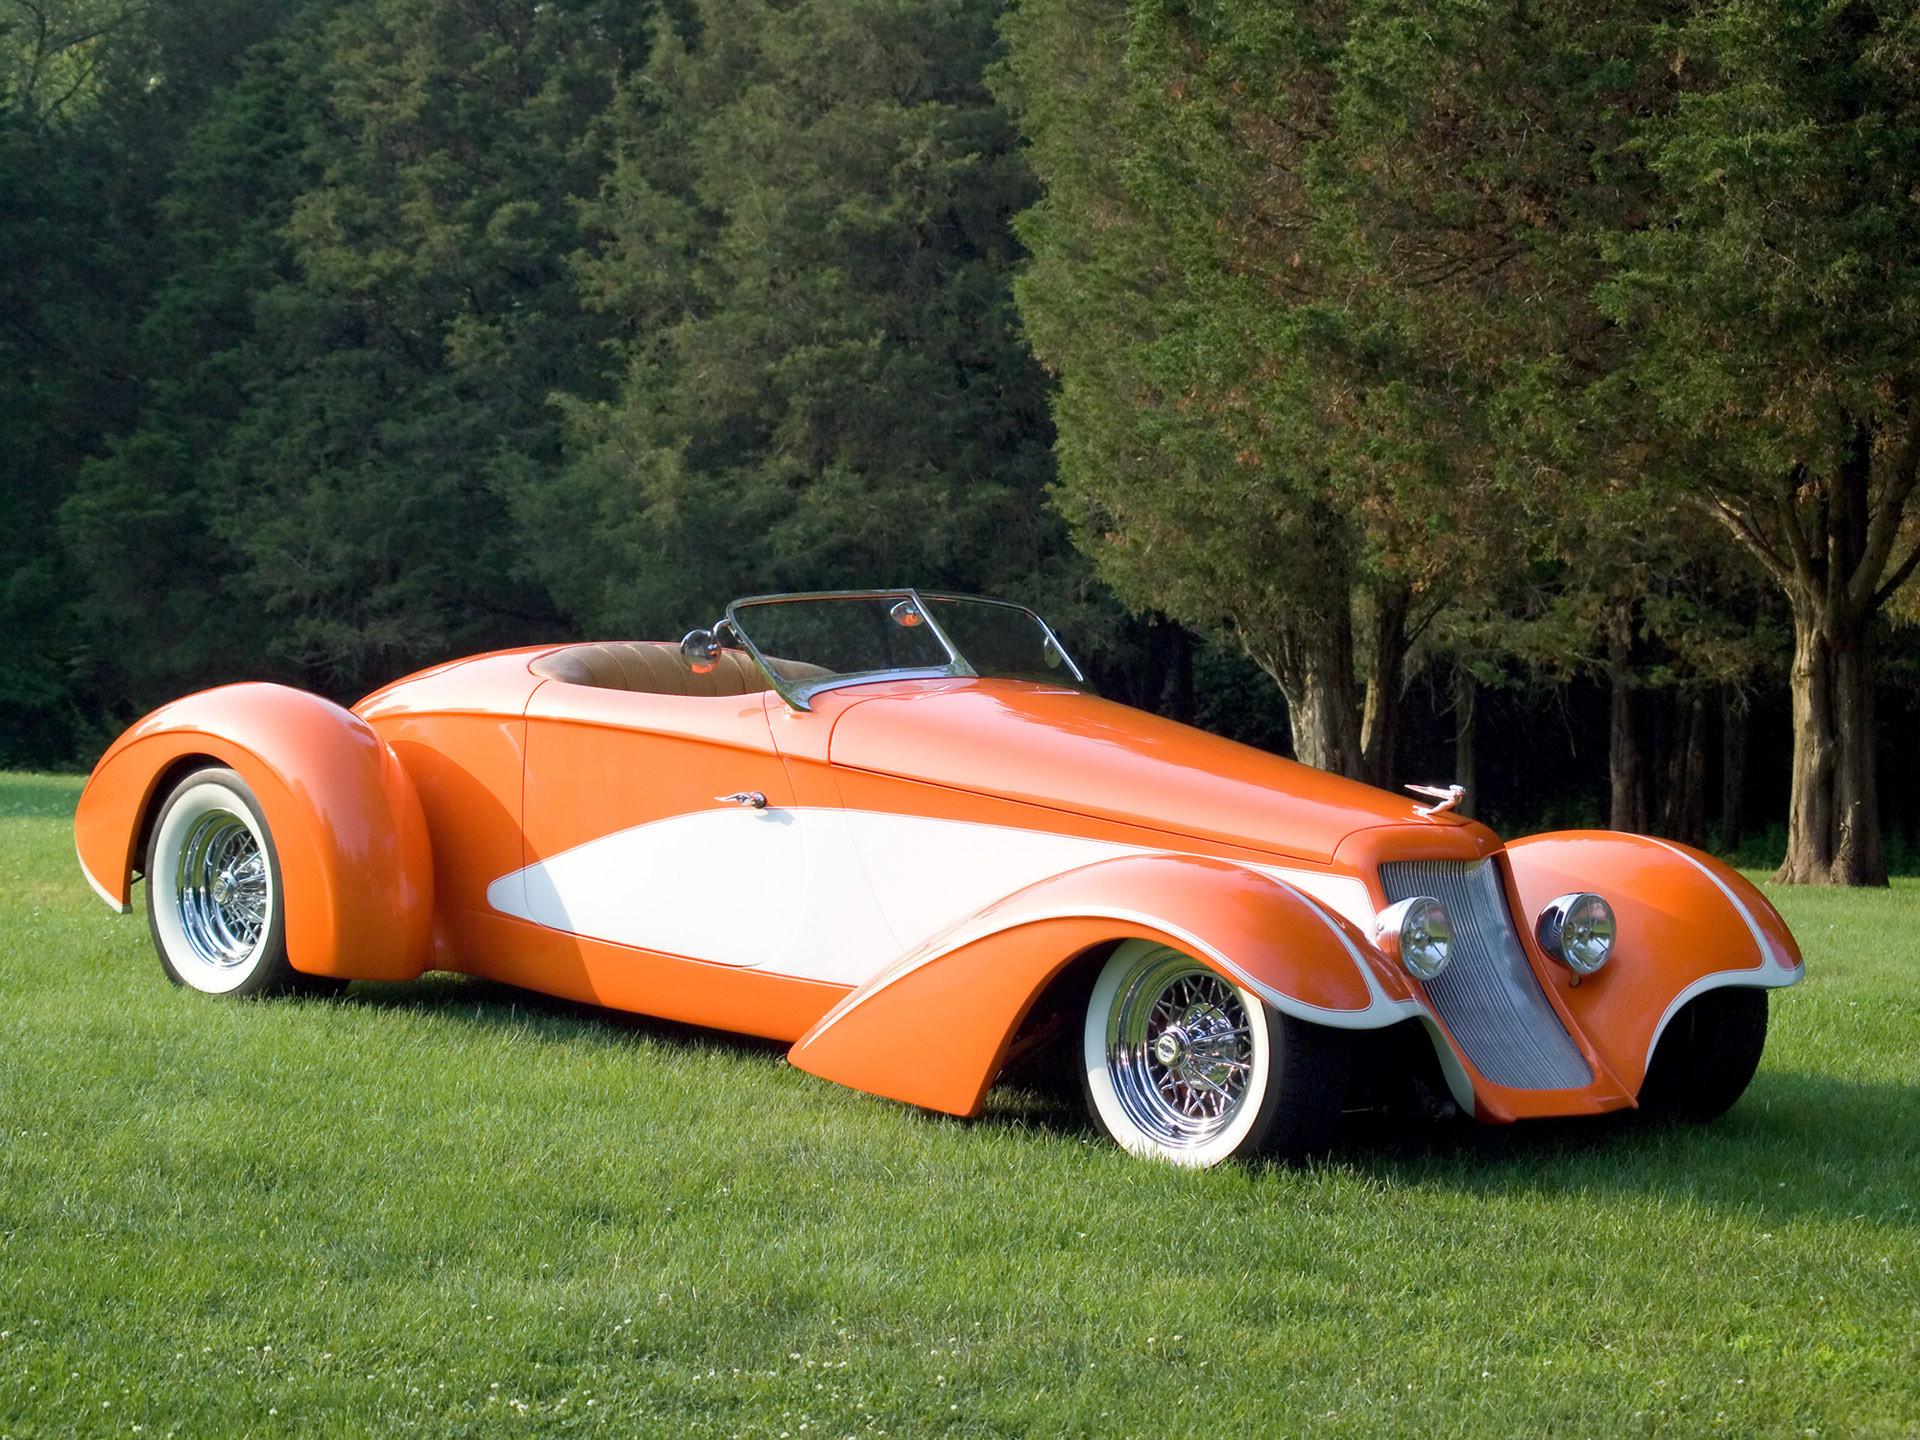 1920x1440 Deco Rides Boattail Speedster by Chip Foose - Side Angle - Grass -   Wallpaper